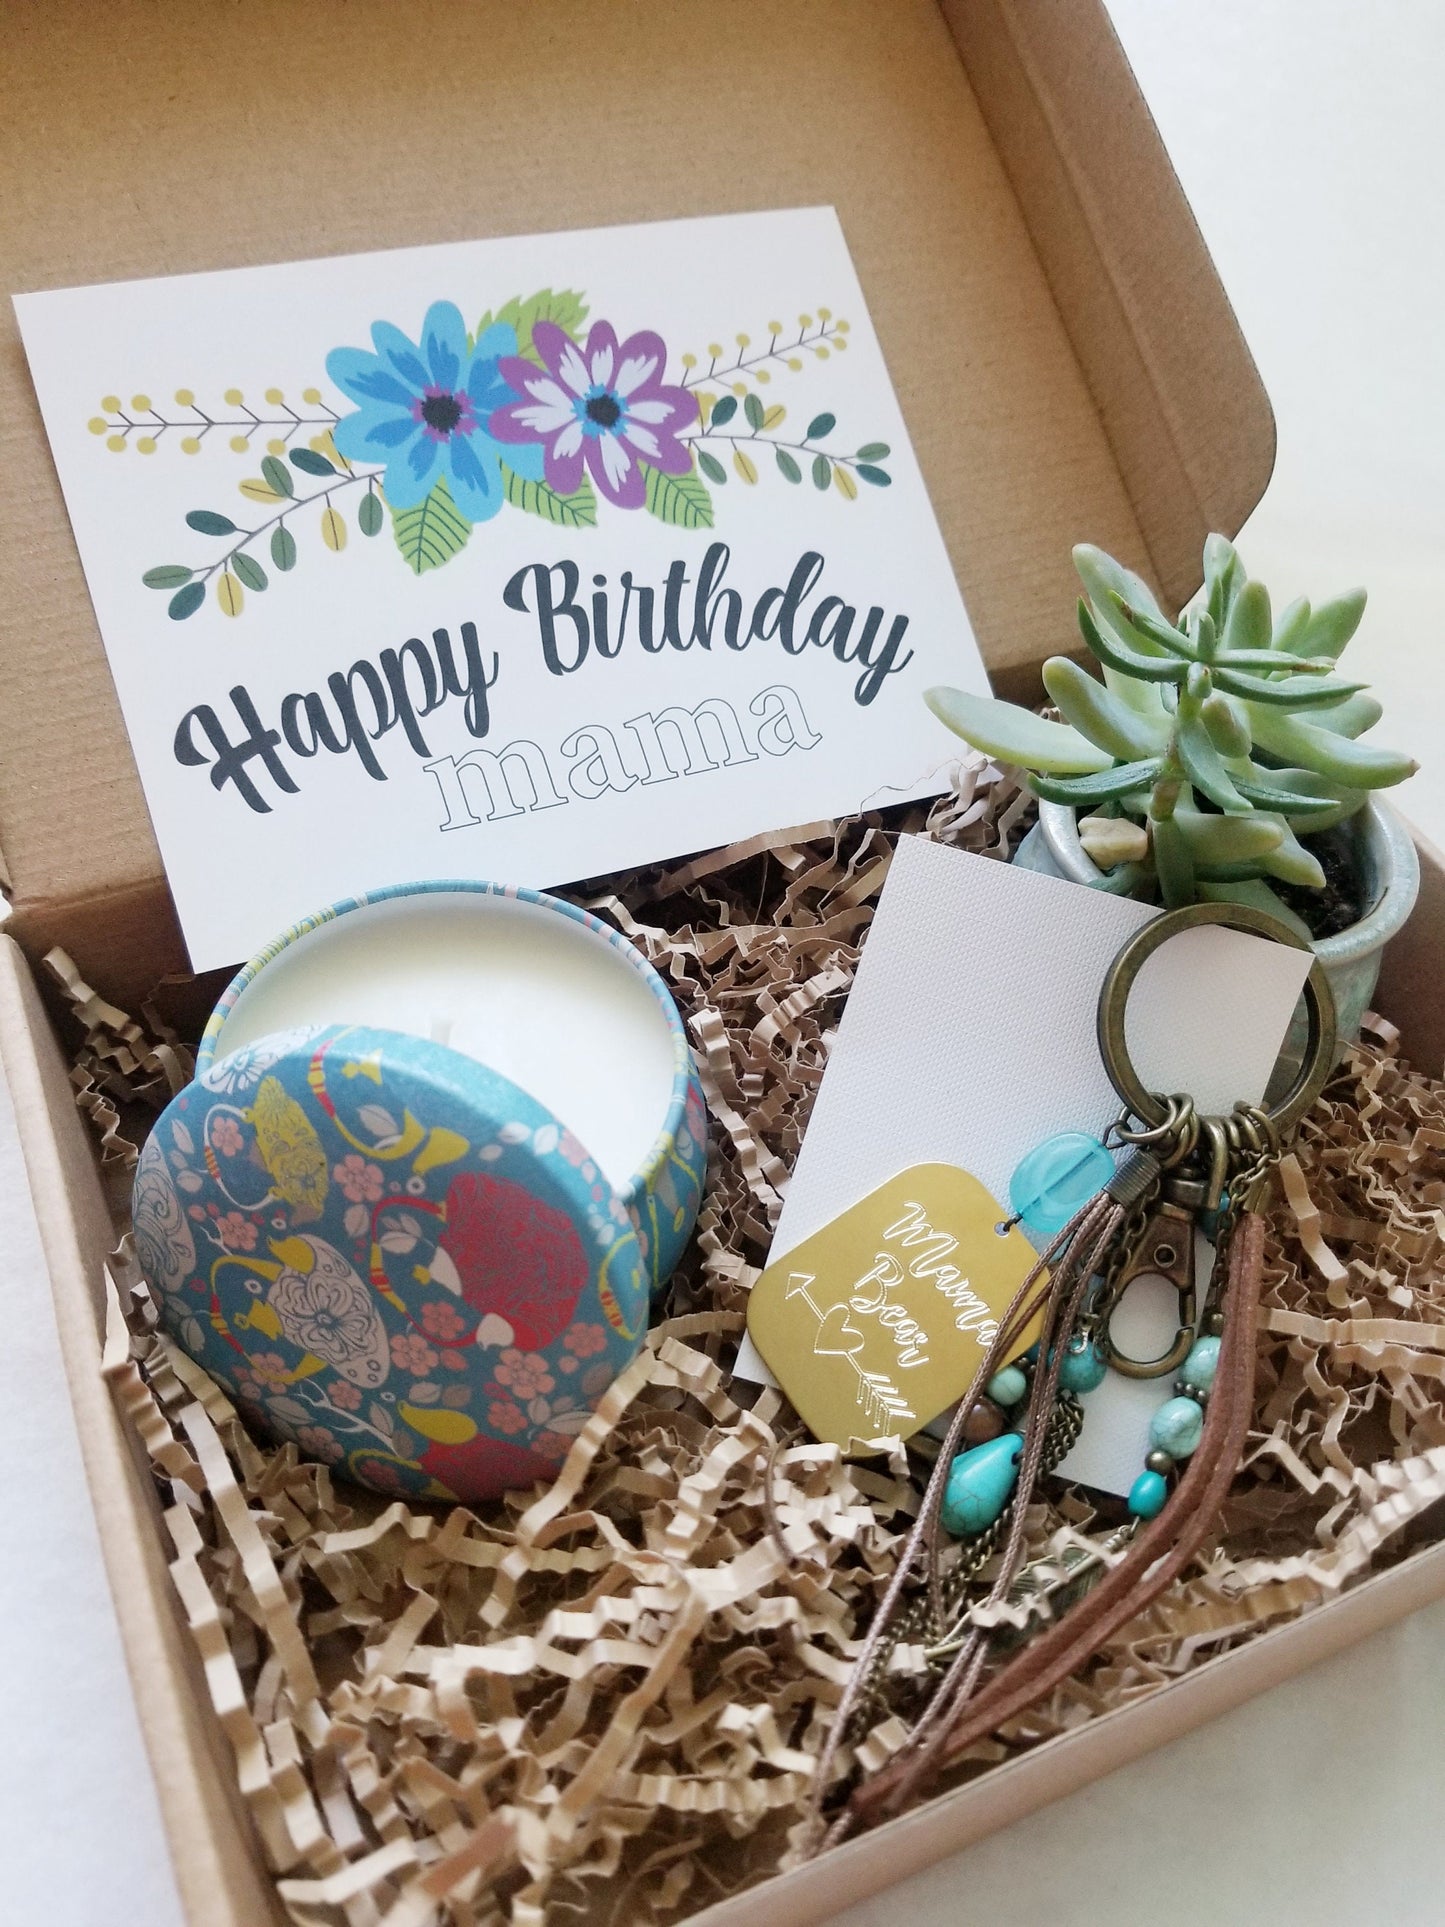 Birthday gift set for Mom - Candle, mini succulent, mama bear keychain